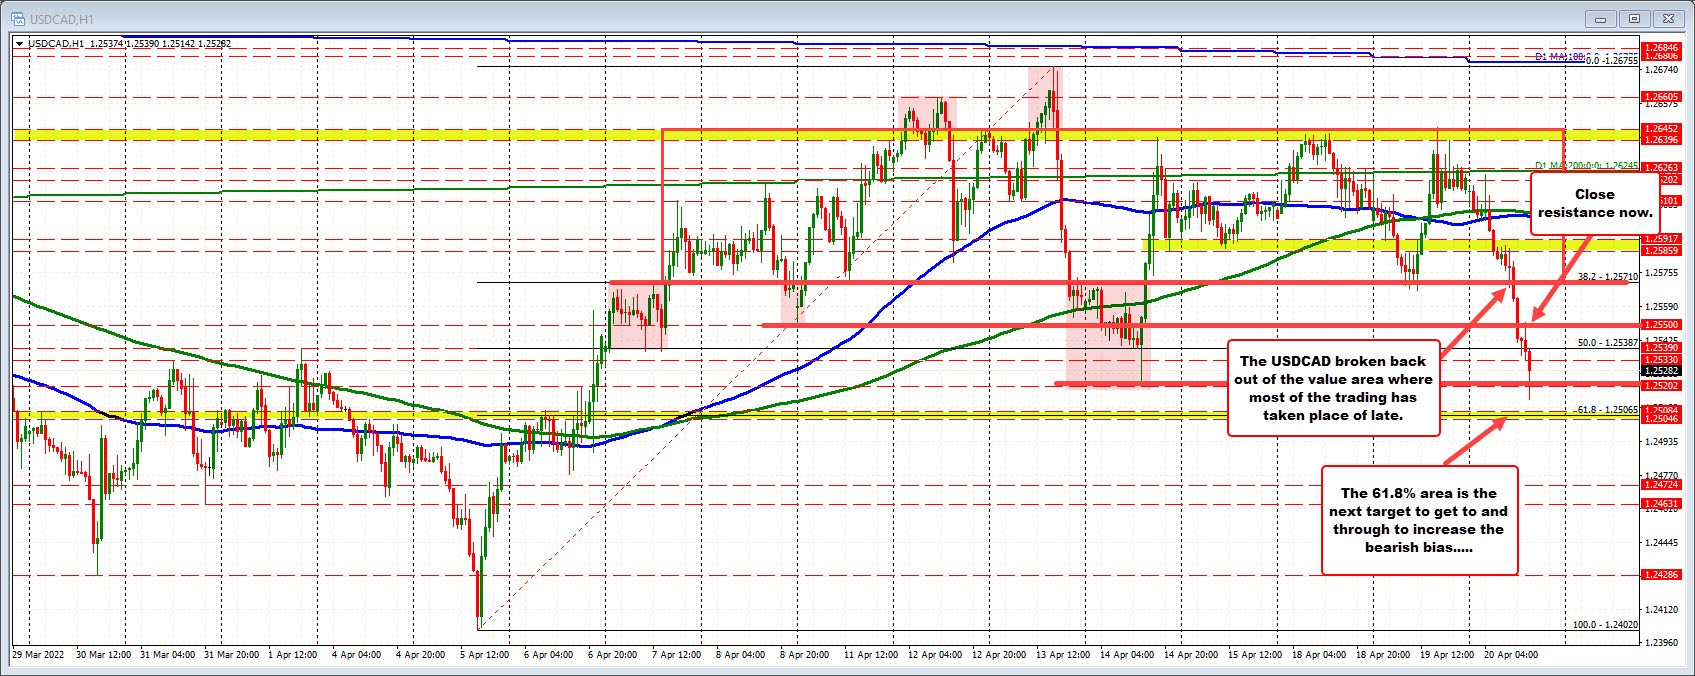 TODAY USDCAD ANALYSIS